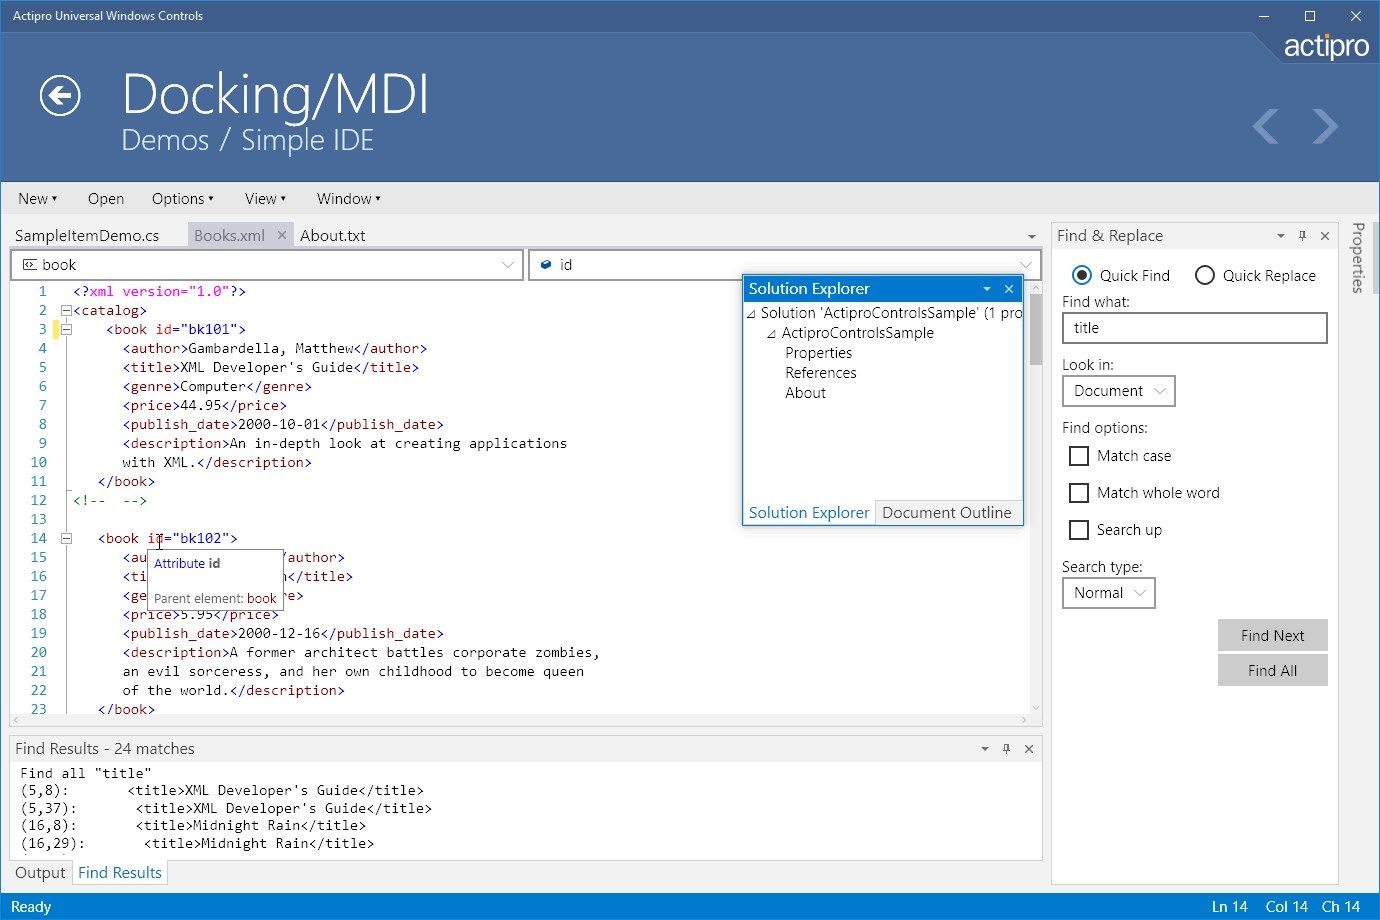 Use our docking window, MDI, and code editor controls to build an IDE, script, or expression editor app.